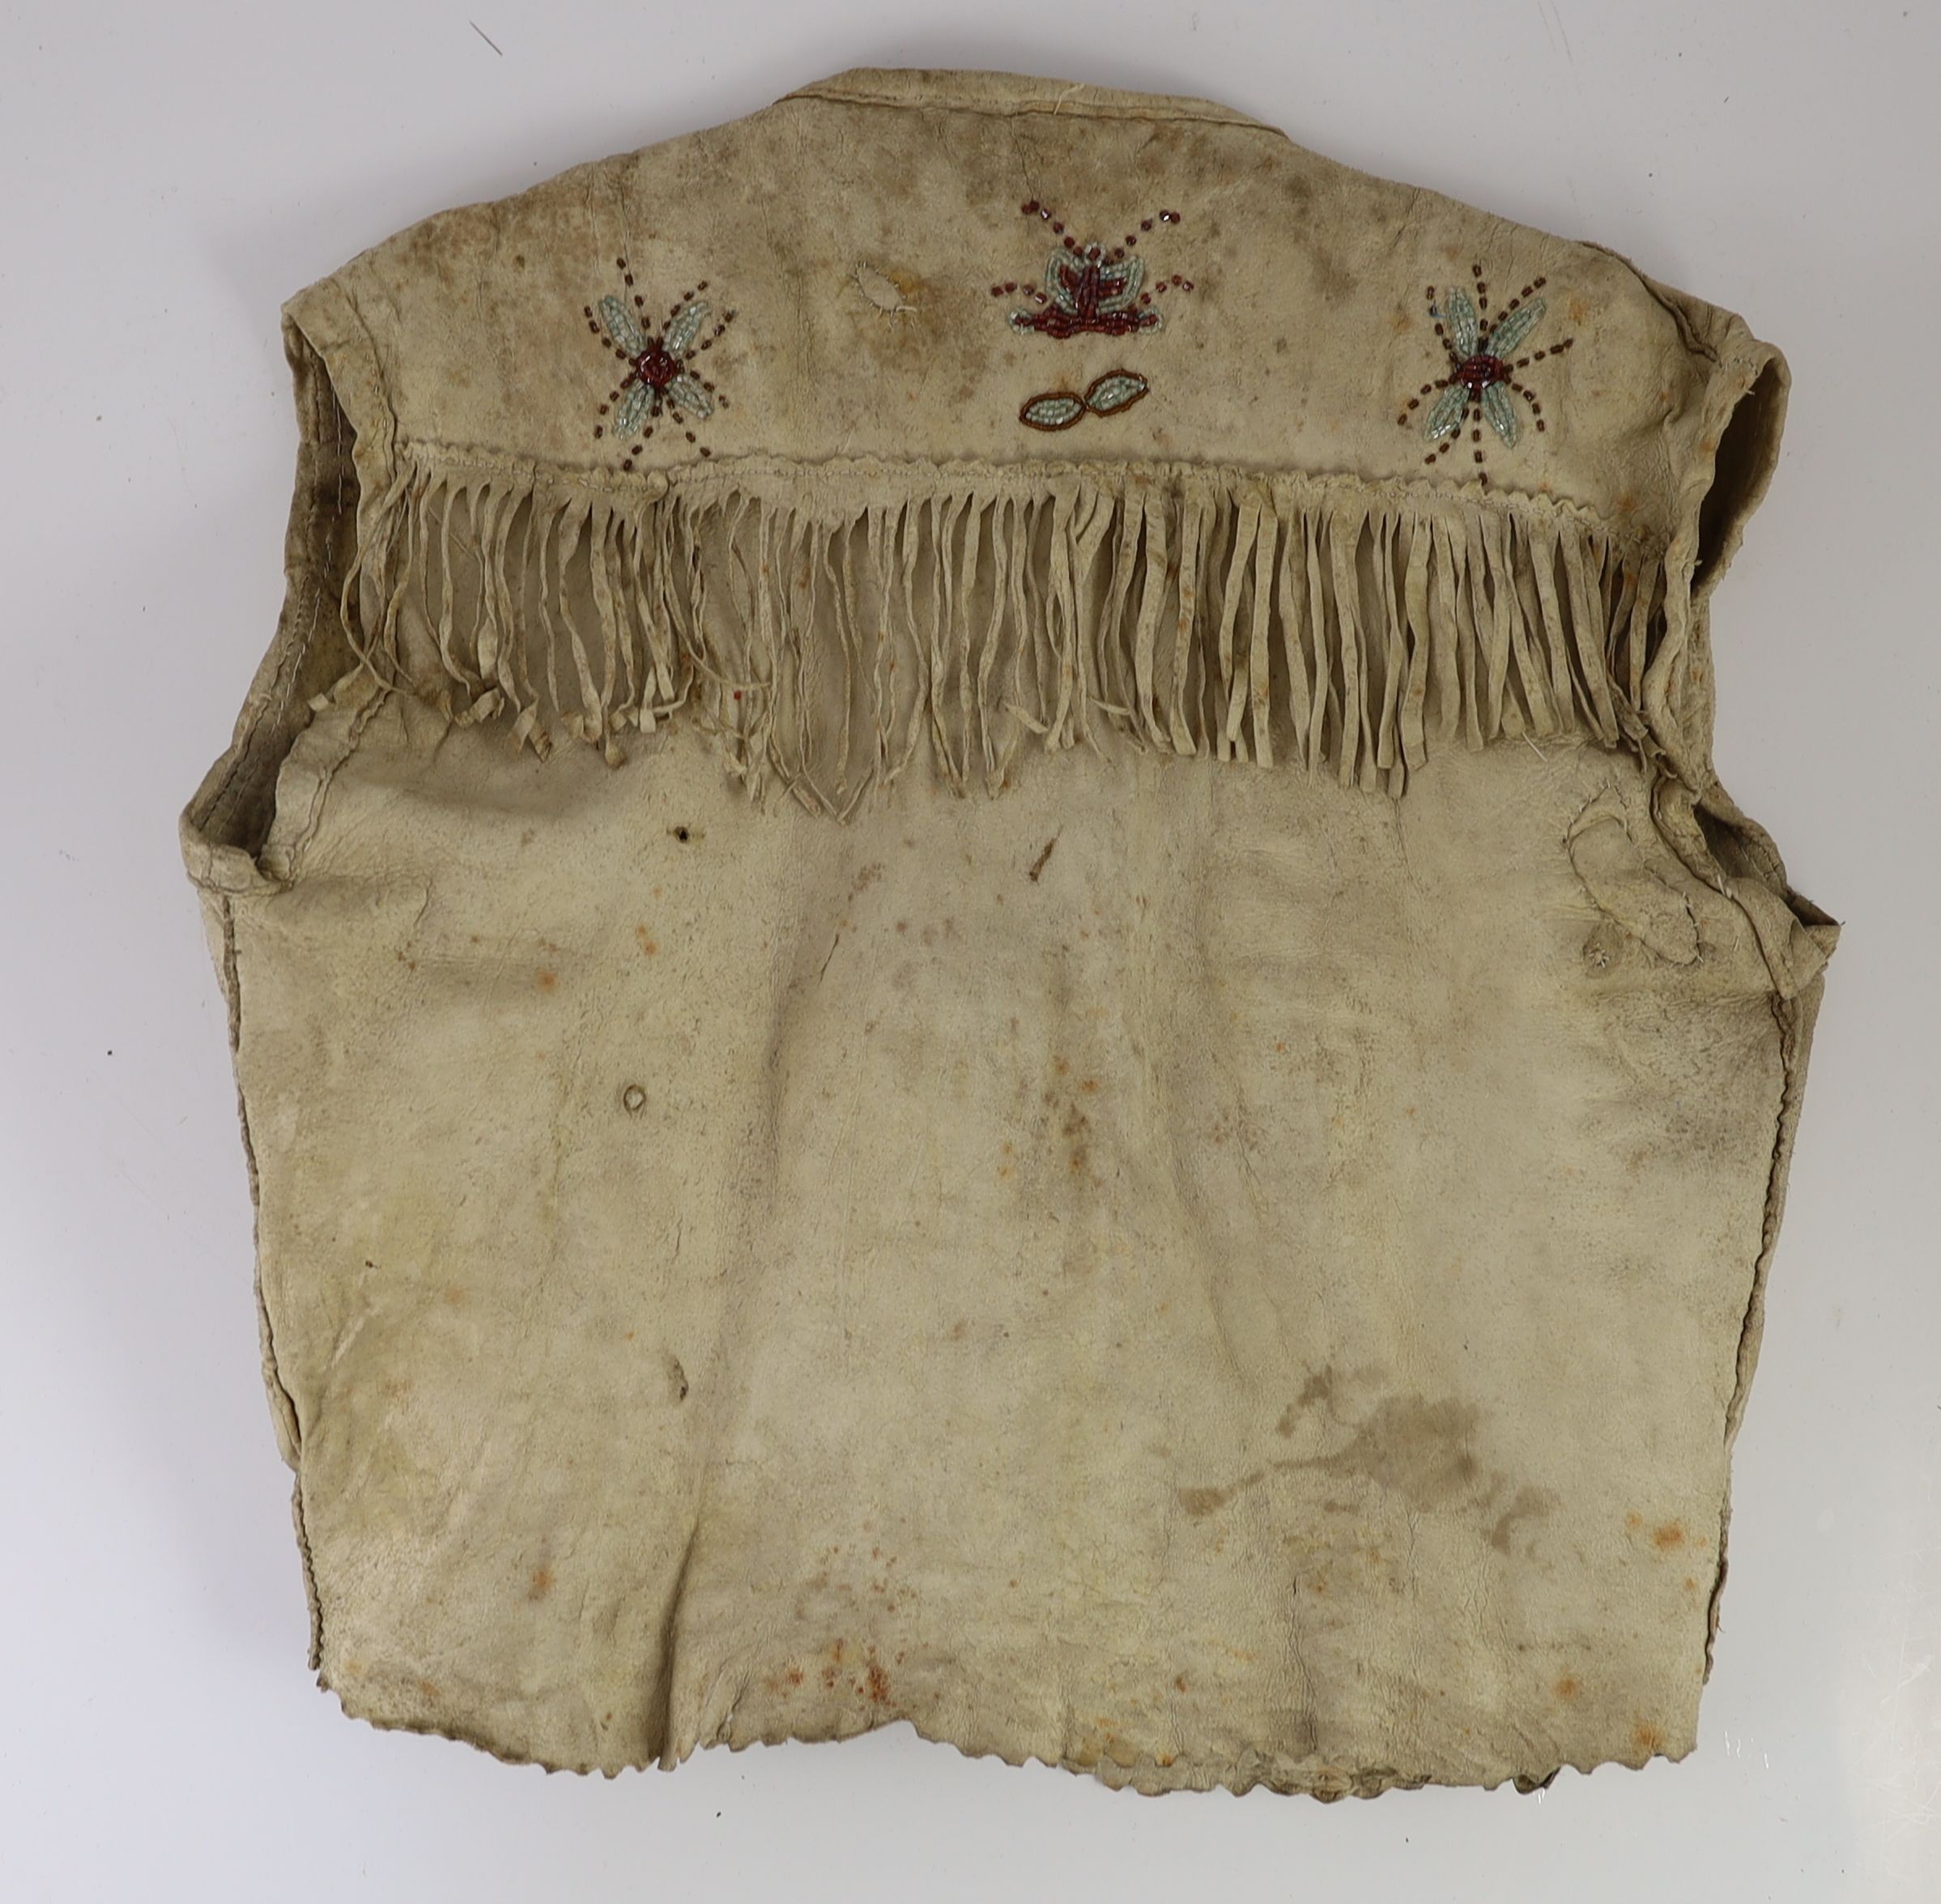 A Native American Plains Indian glass beadwork hide waistcoat, probably Iroquois